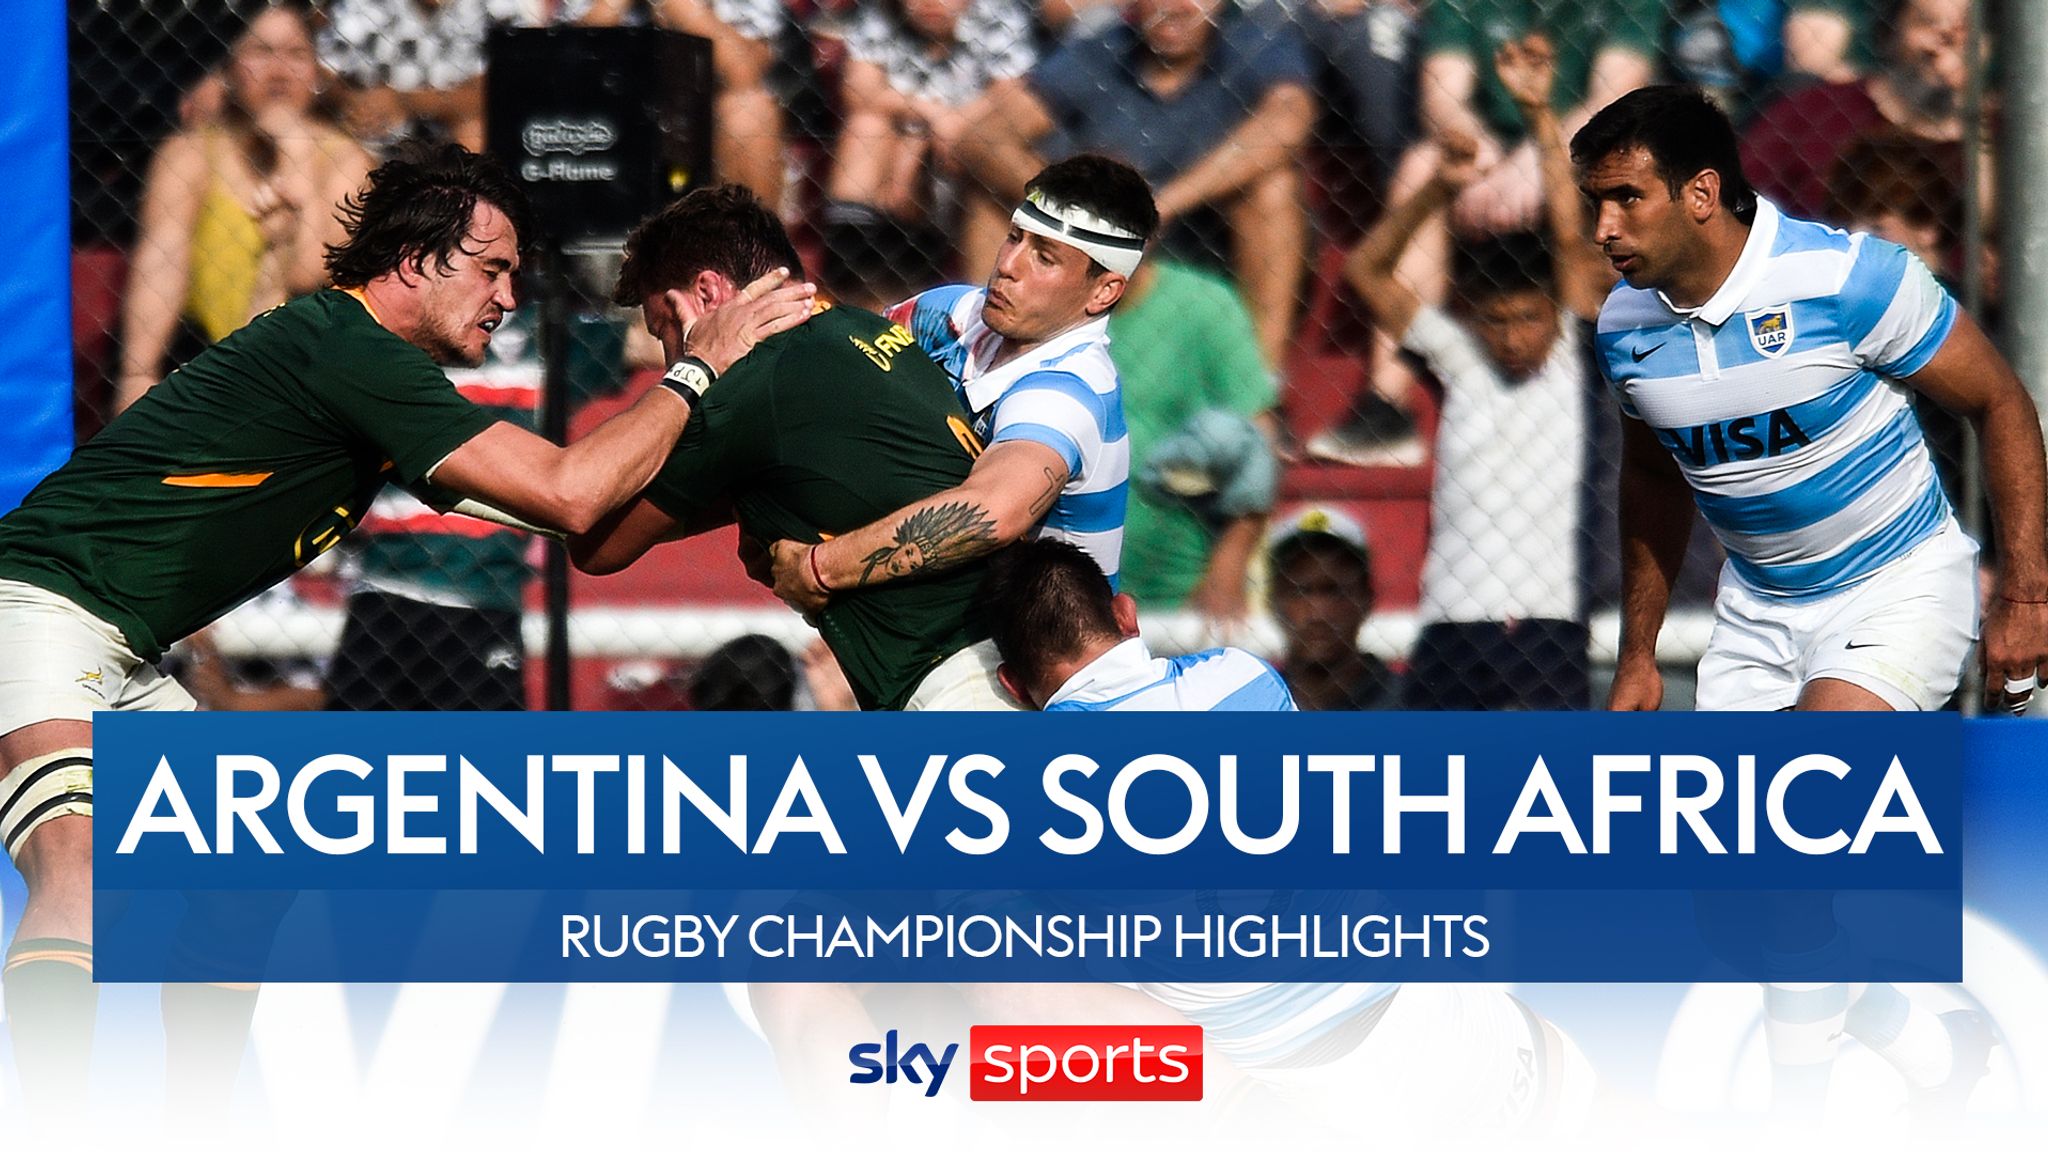 Argentina v South Africa Rugby Championship highlights Video Watch TV Show Sky Sports